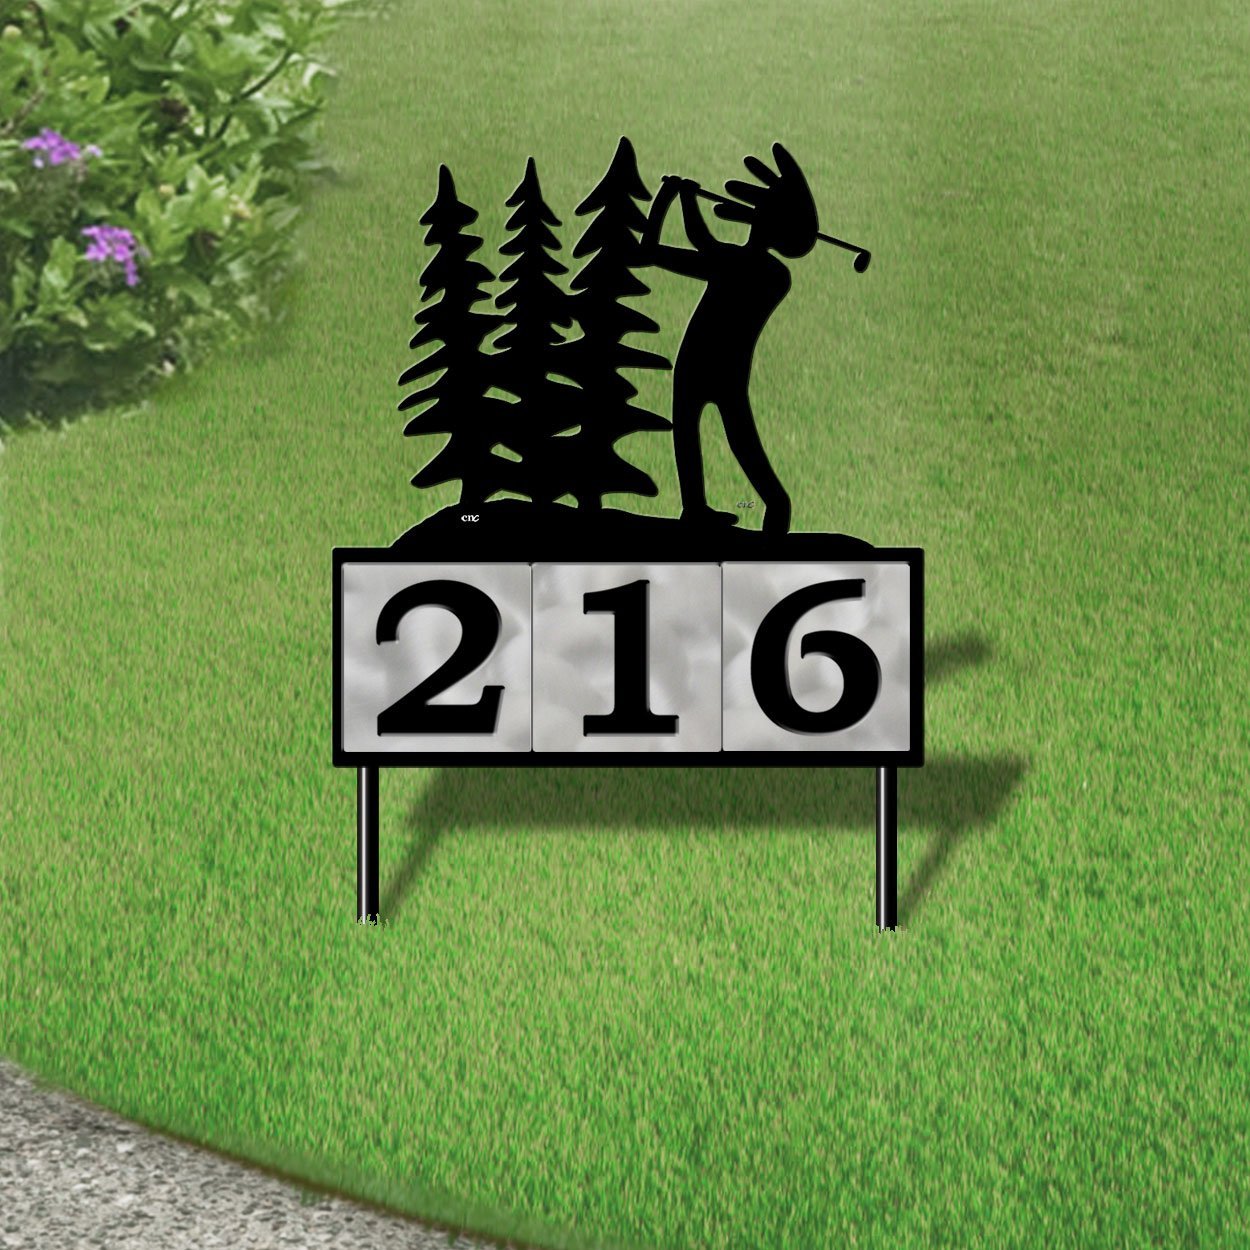 610143 - Kokopelli Golfer in the Woods Design 3-Digit Horizontal 6-inch Tile Outdoor House Numbers Yard Sign